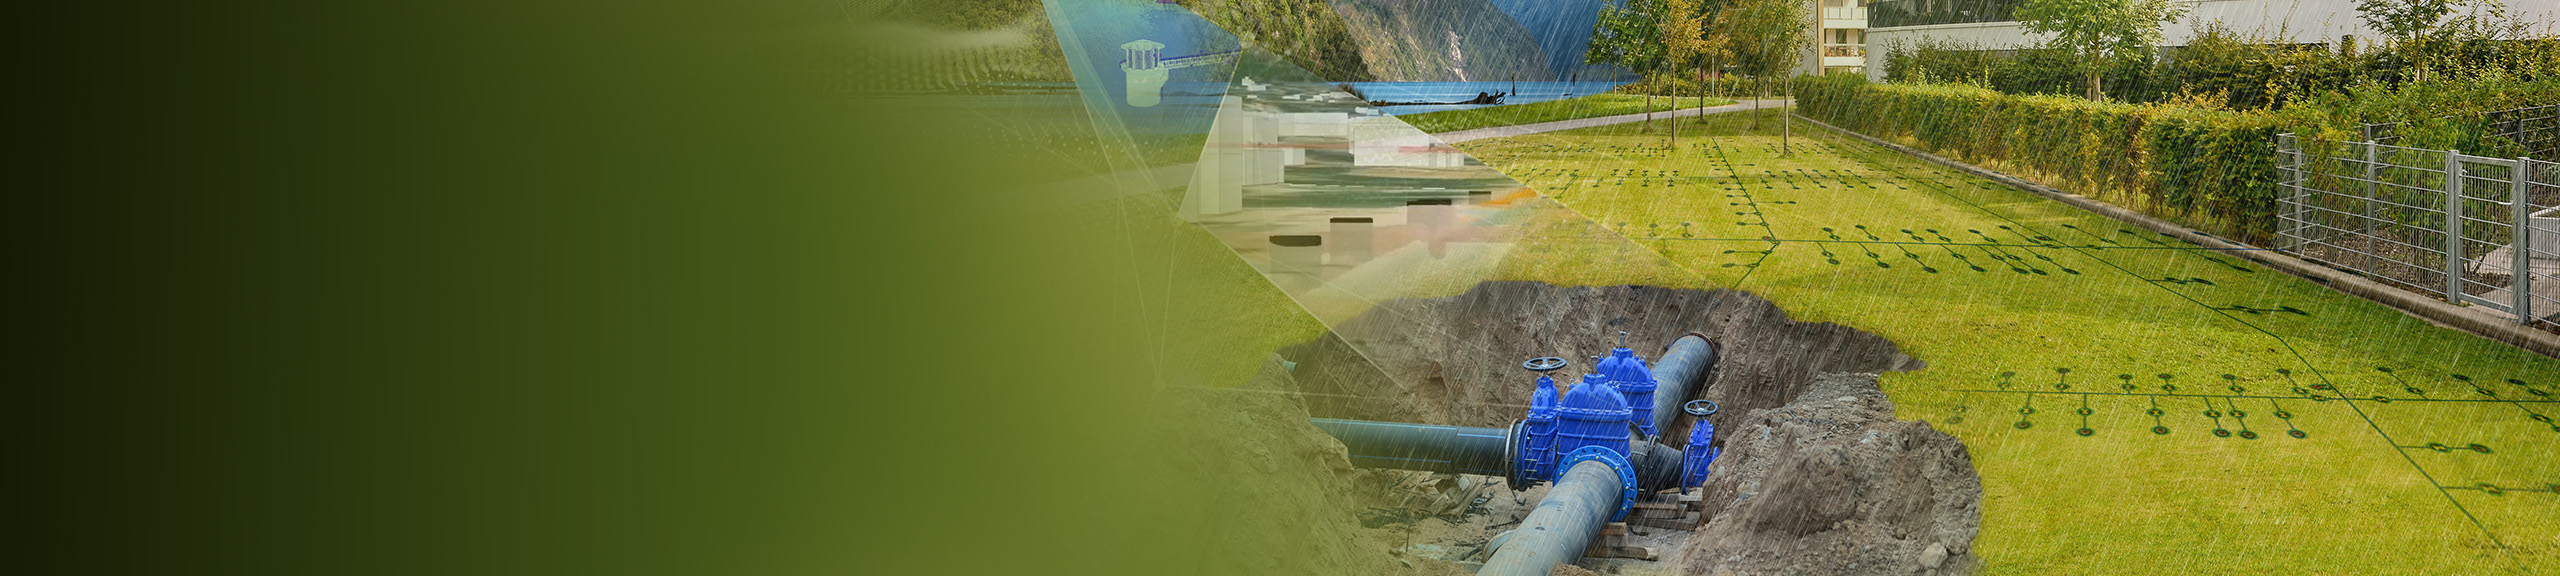 A composite image with a green field overlaid with a grid, a rocky hole exposing blue pipes and gauges, a river beside a steep hillside, and a 3D model of an industrial complex